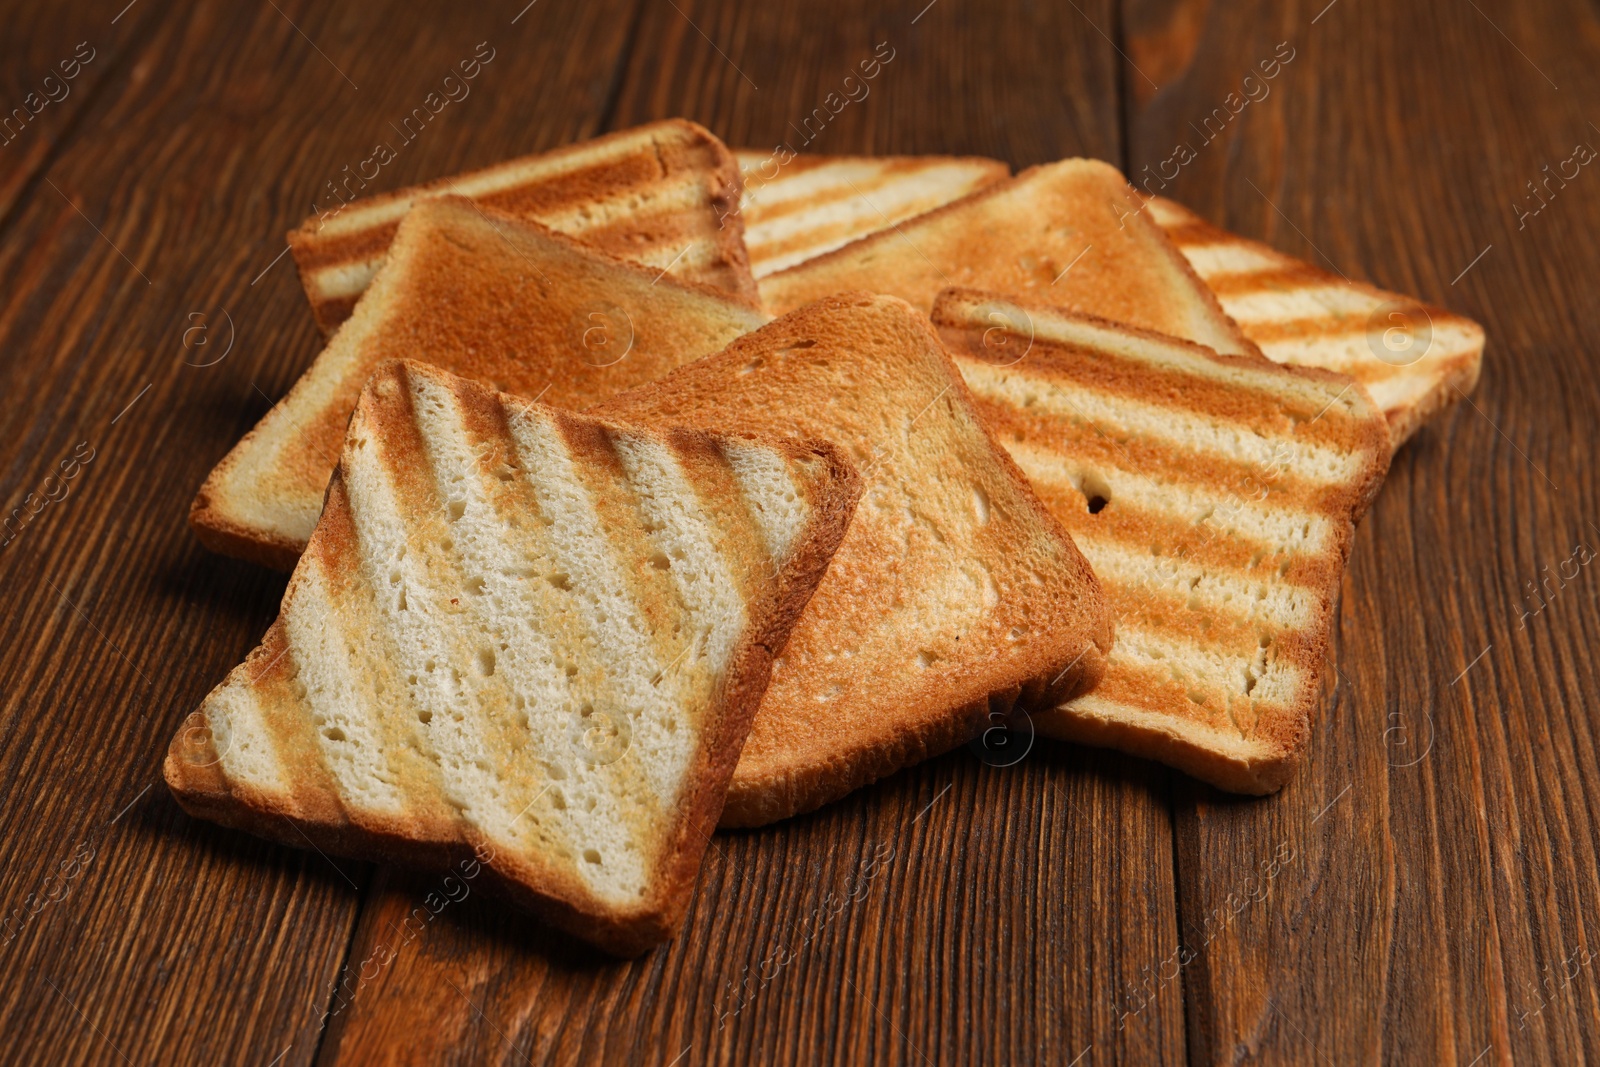 Photo of Slices of tasty toasted bread on wooden table